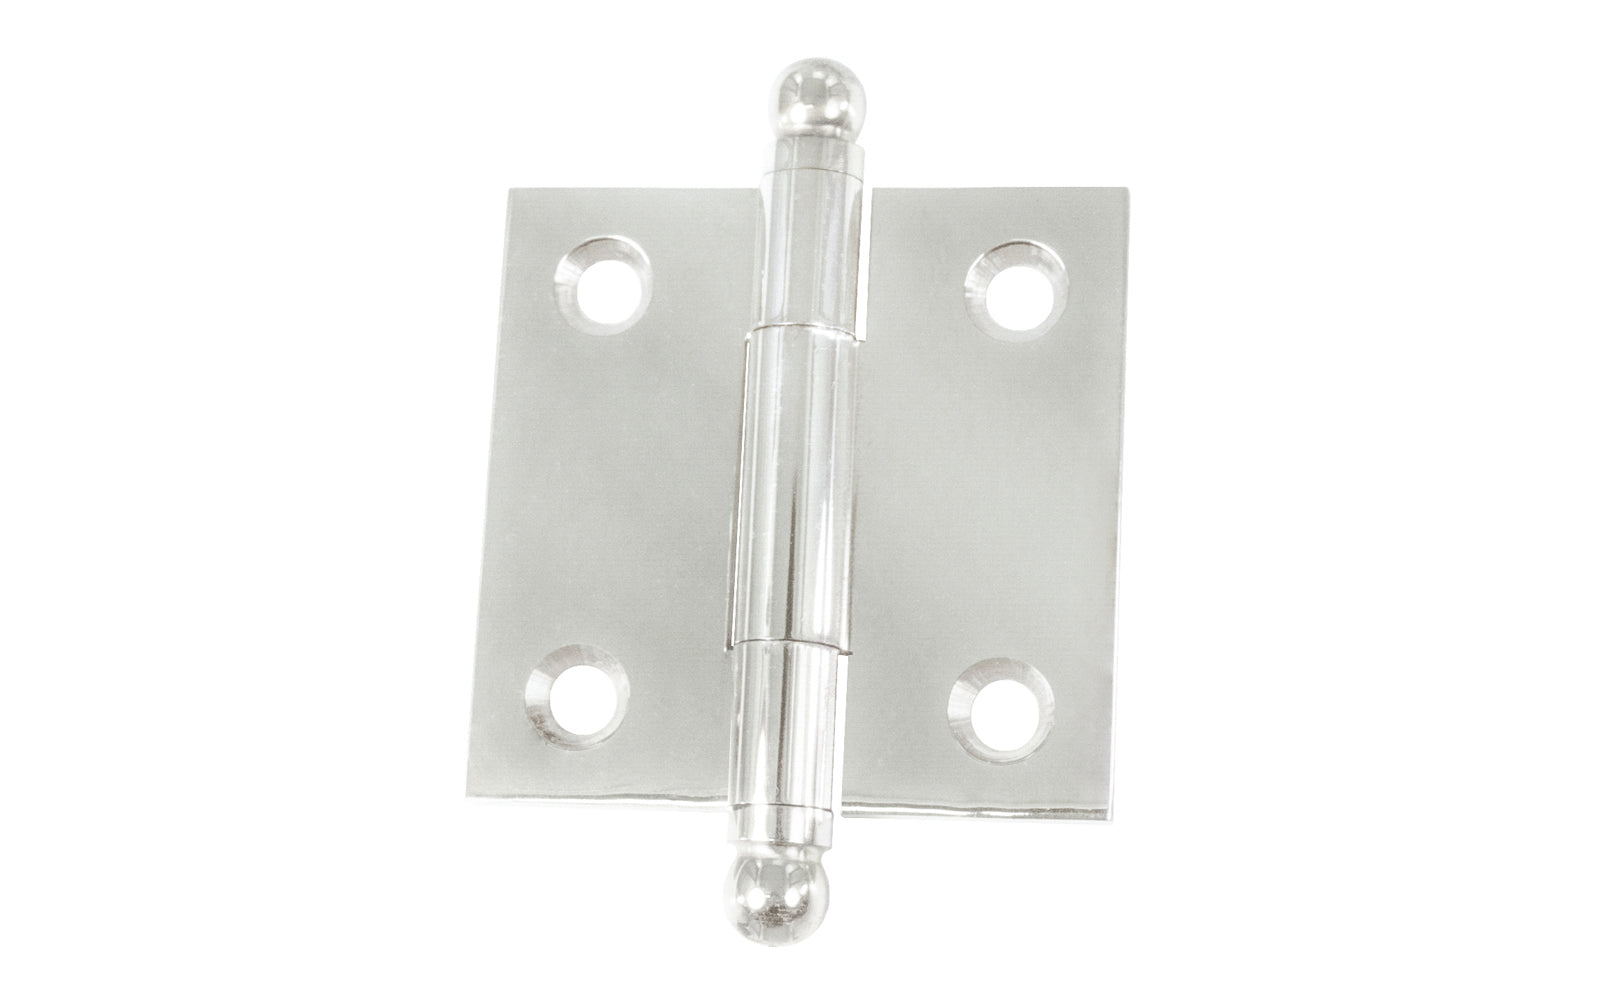 Classic Solid Brass Ball-Tip Cabinet Hinge ~ 1-1/2" x 1-1/2". Full mortise extruded hinges. 3/32" heavy duty leaf thickness gauge. Non-removable fixed hinge pin with ball tips. High quality thick cabinet hinge with ball tips. Polished Chrome finish